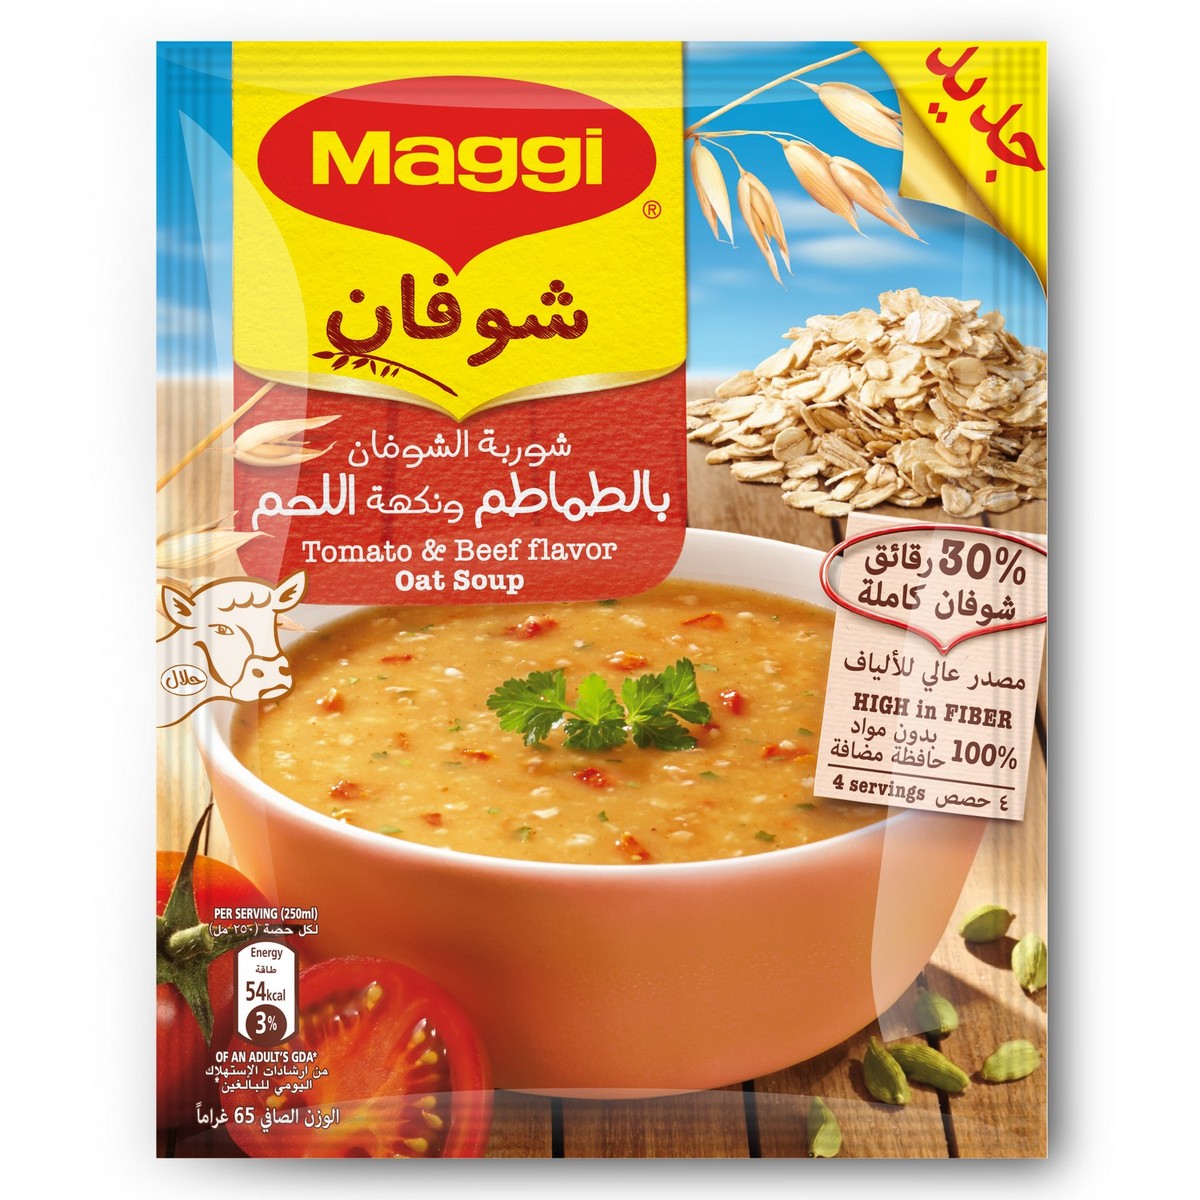 Maggi Tomato And Beef Flavour Oat Soup 12 x 65 g